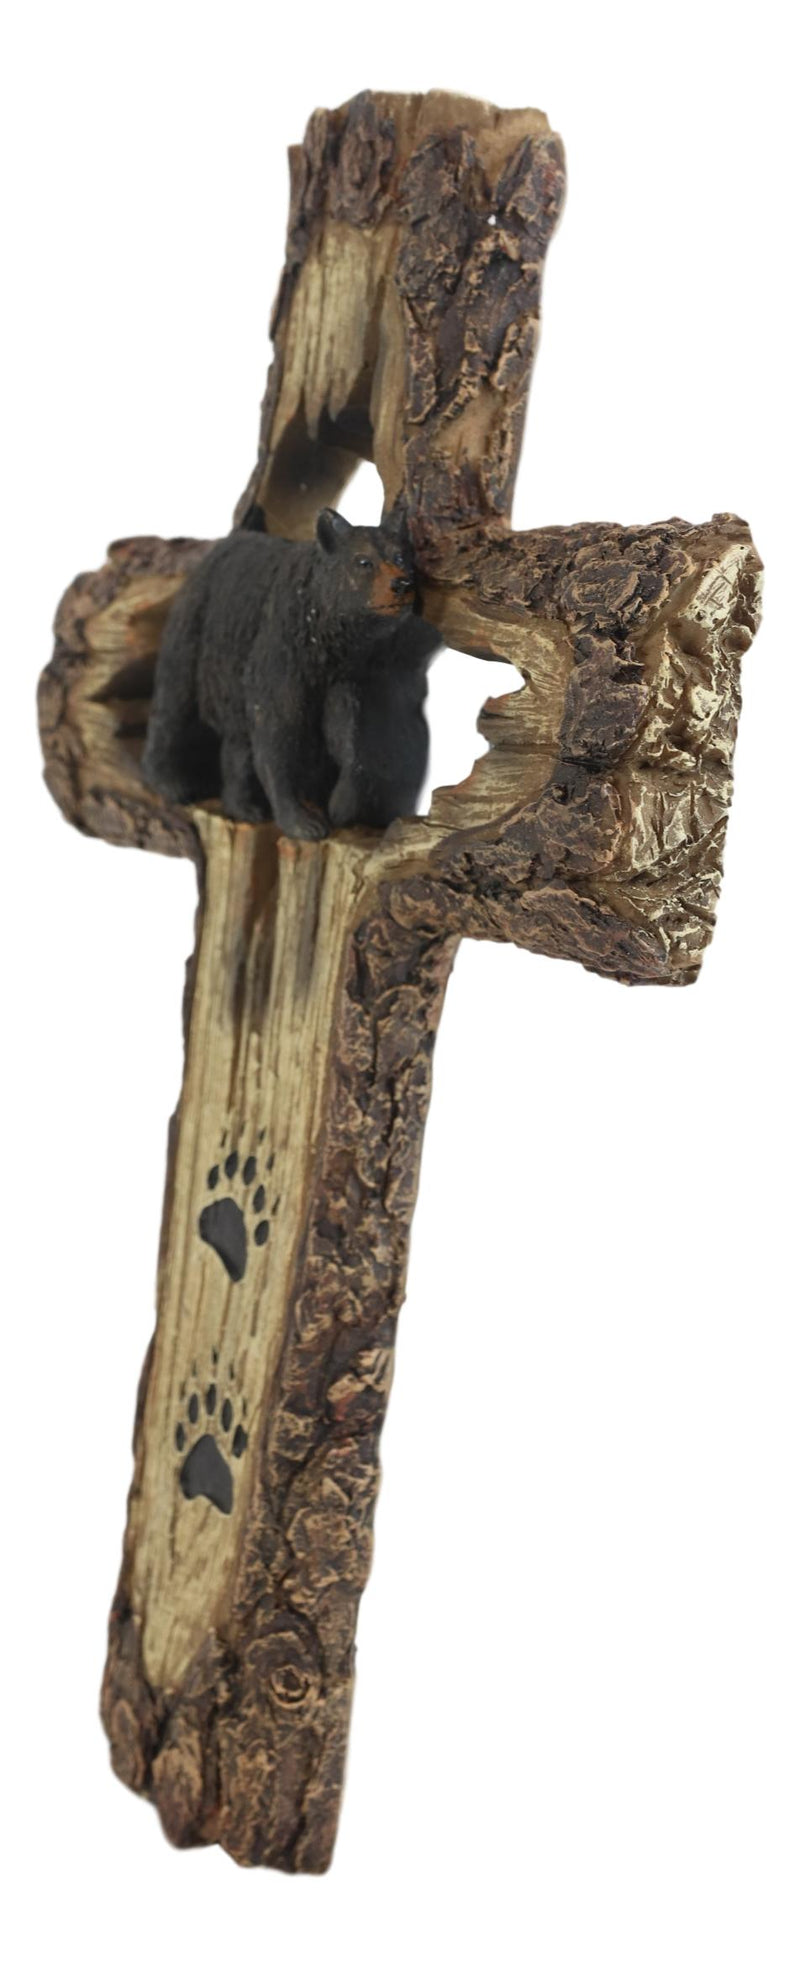 Rustic Western Black Bear With Paw Prints Faux Wood Wall Cross Decor Plaque